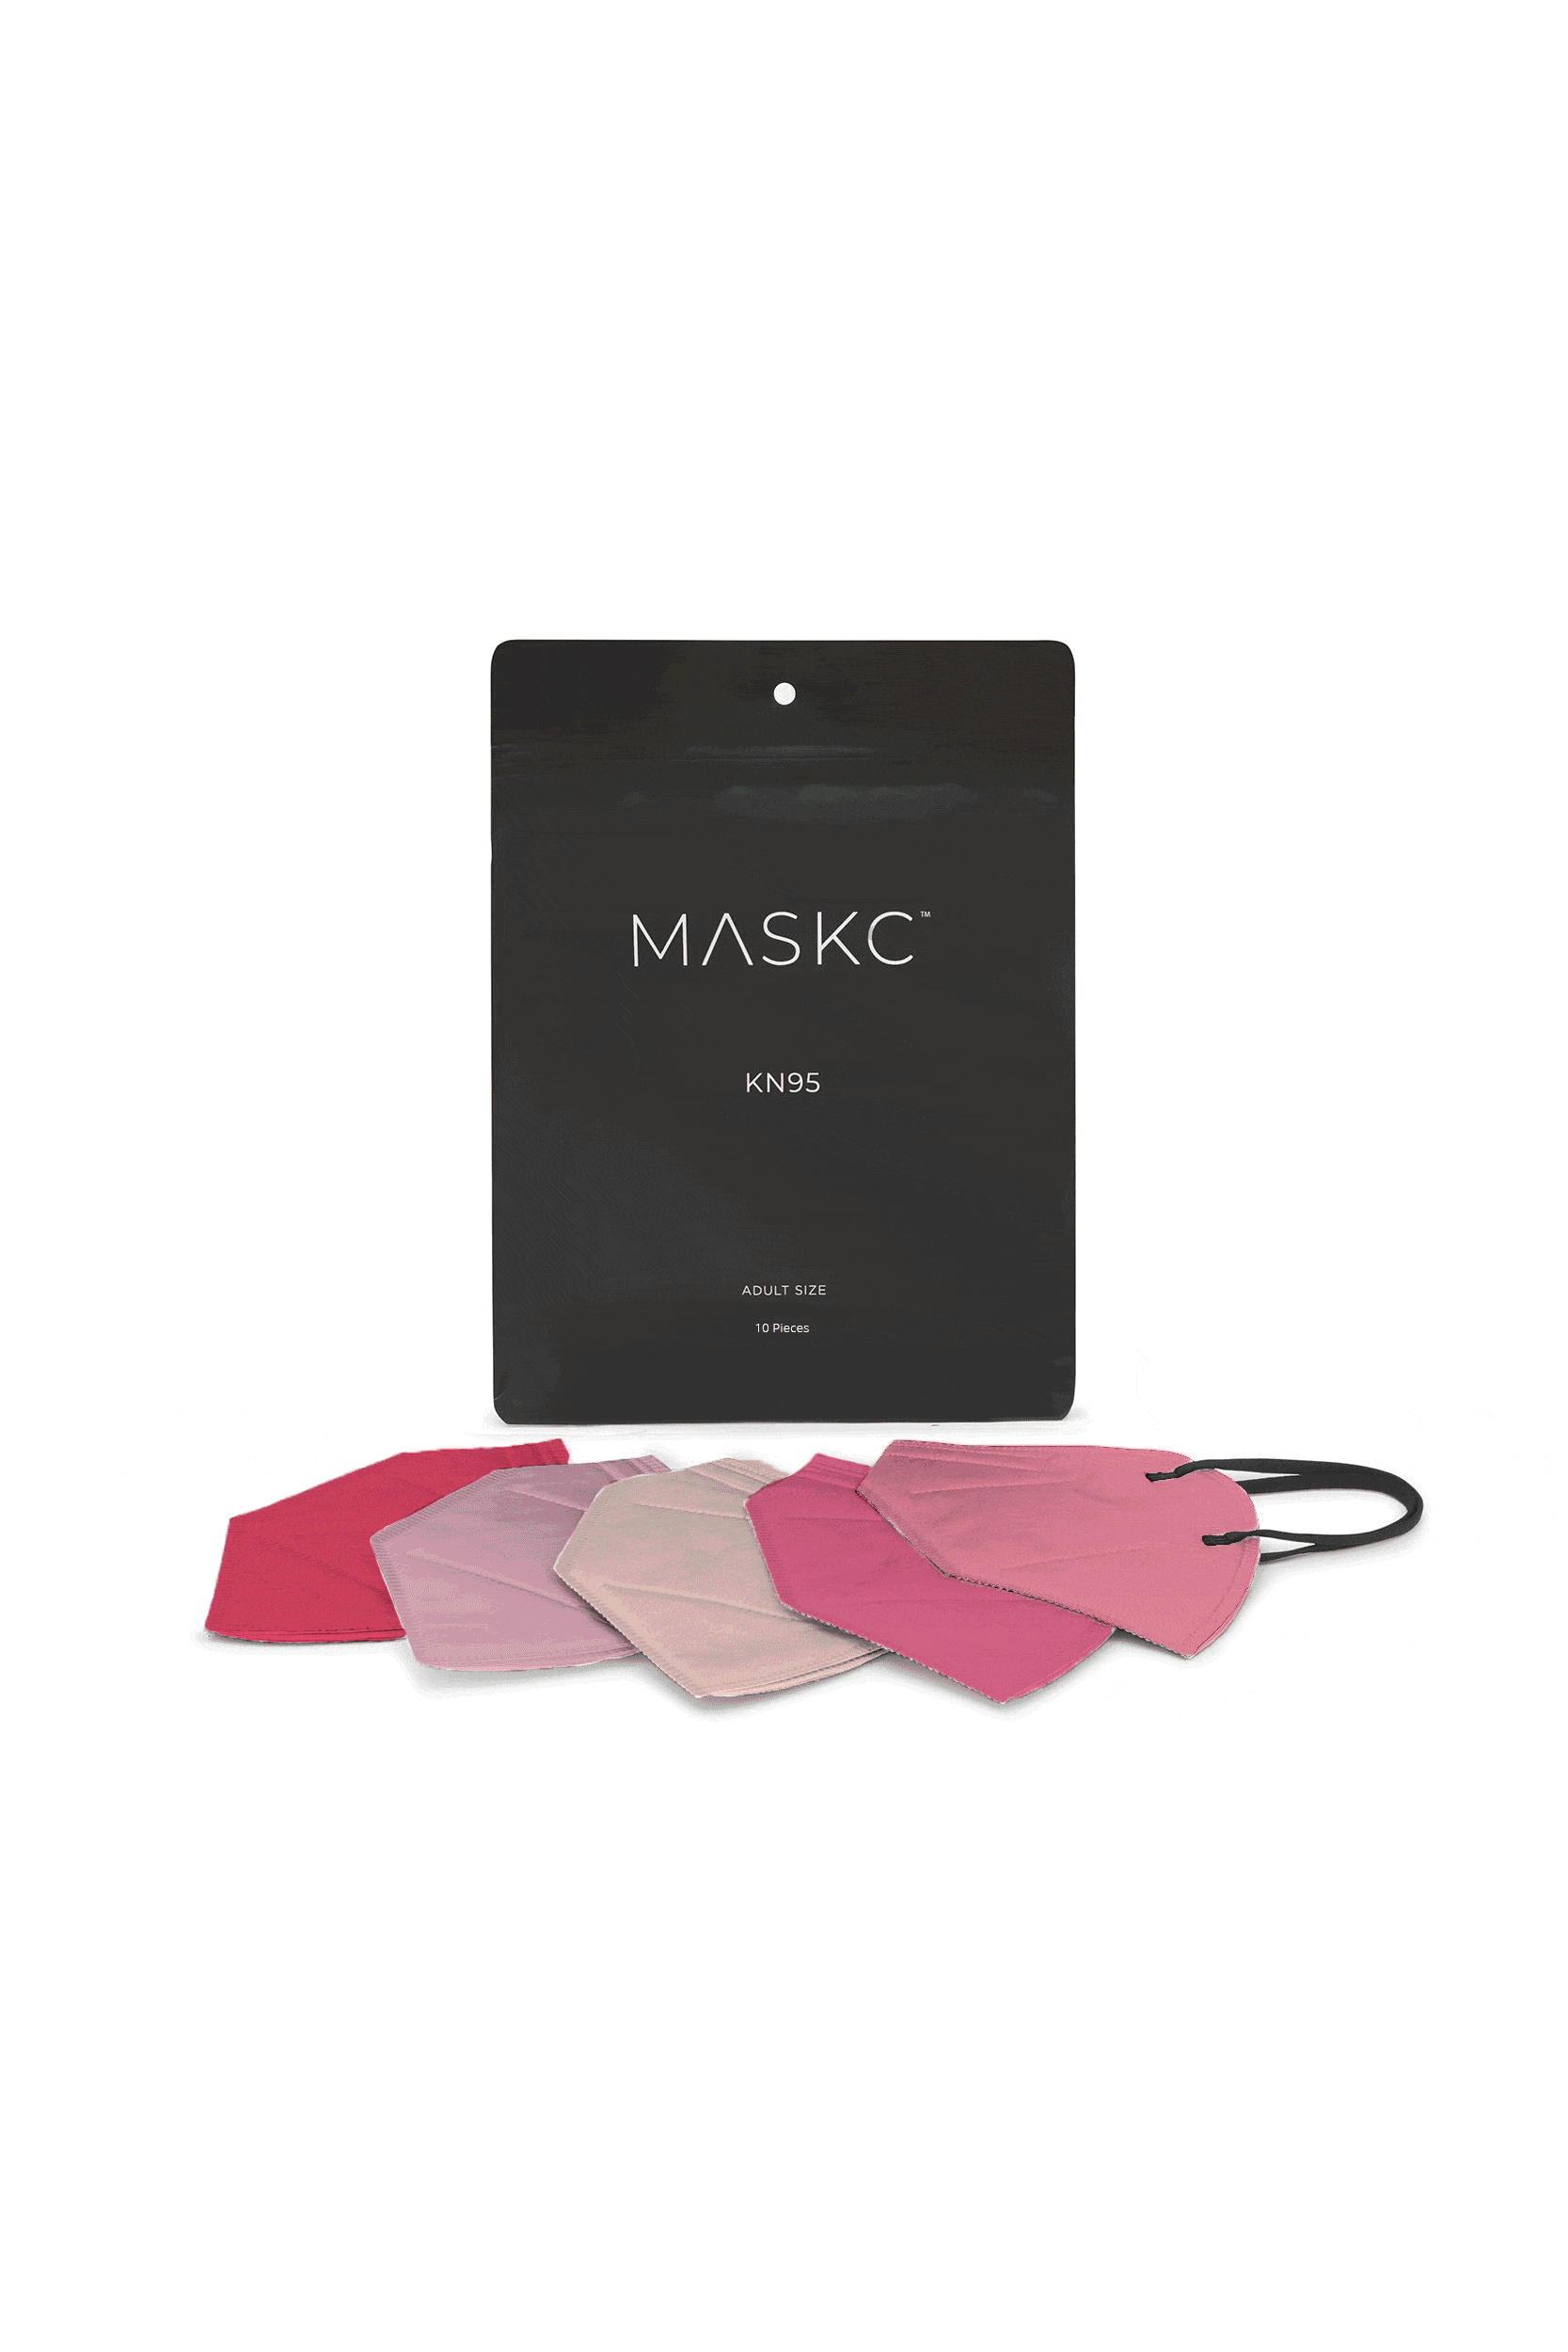 10 Pack of Multicolor Pink KN95 face masks. Each pack contains stylish high quality face masks. 